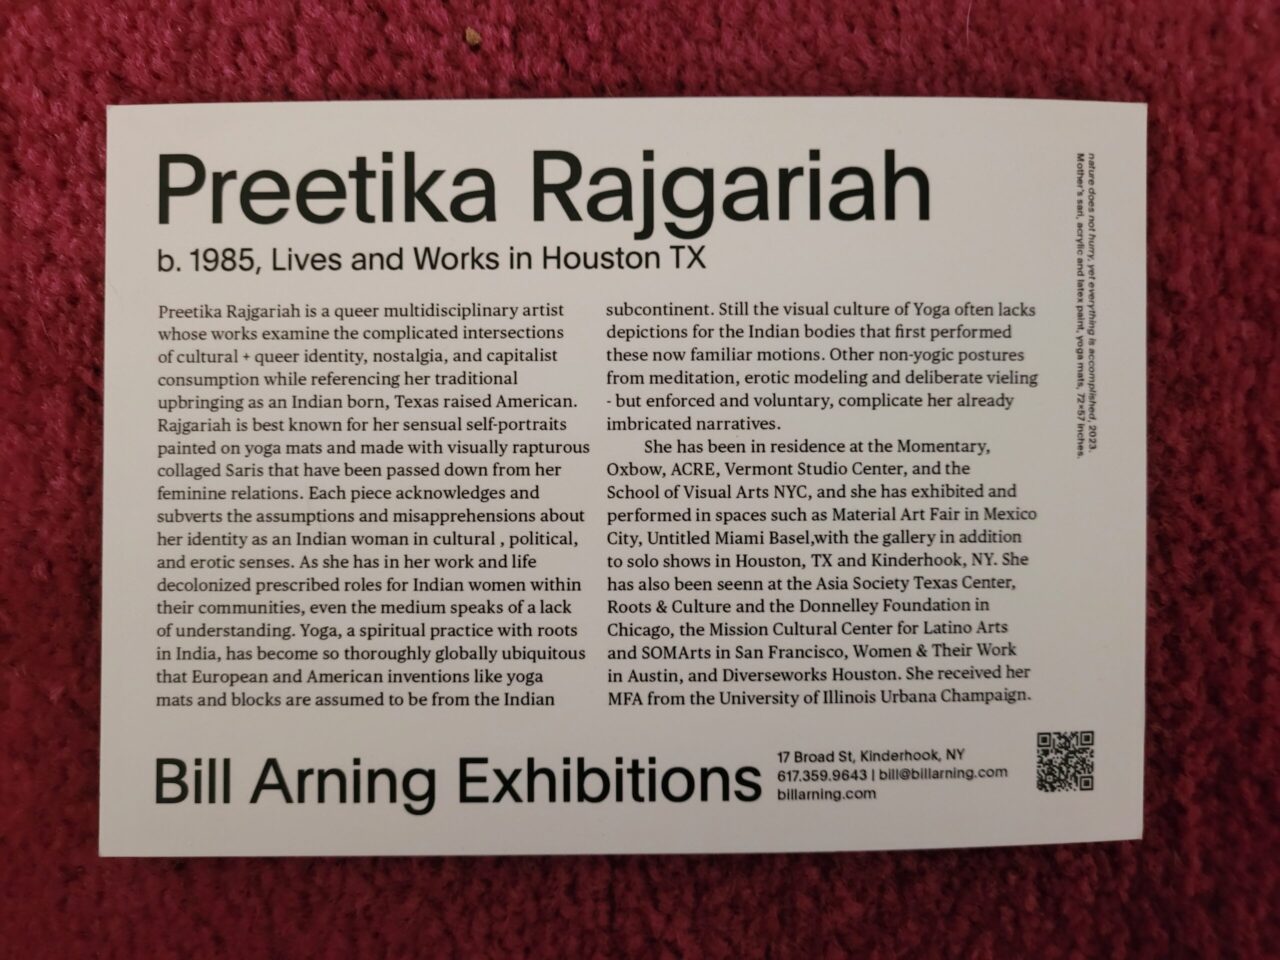 author card from exhibition